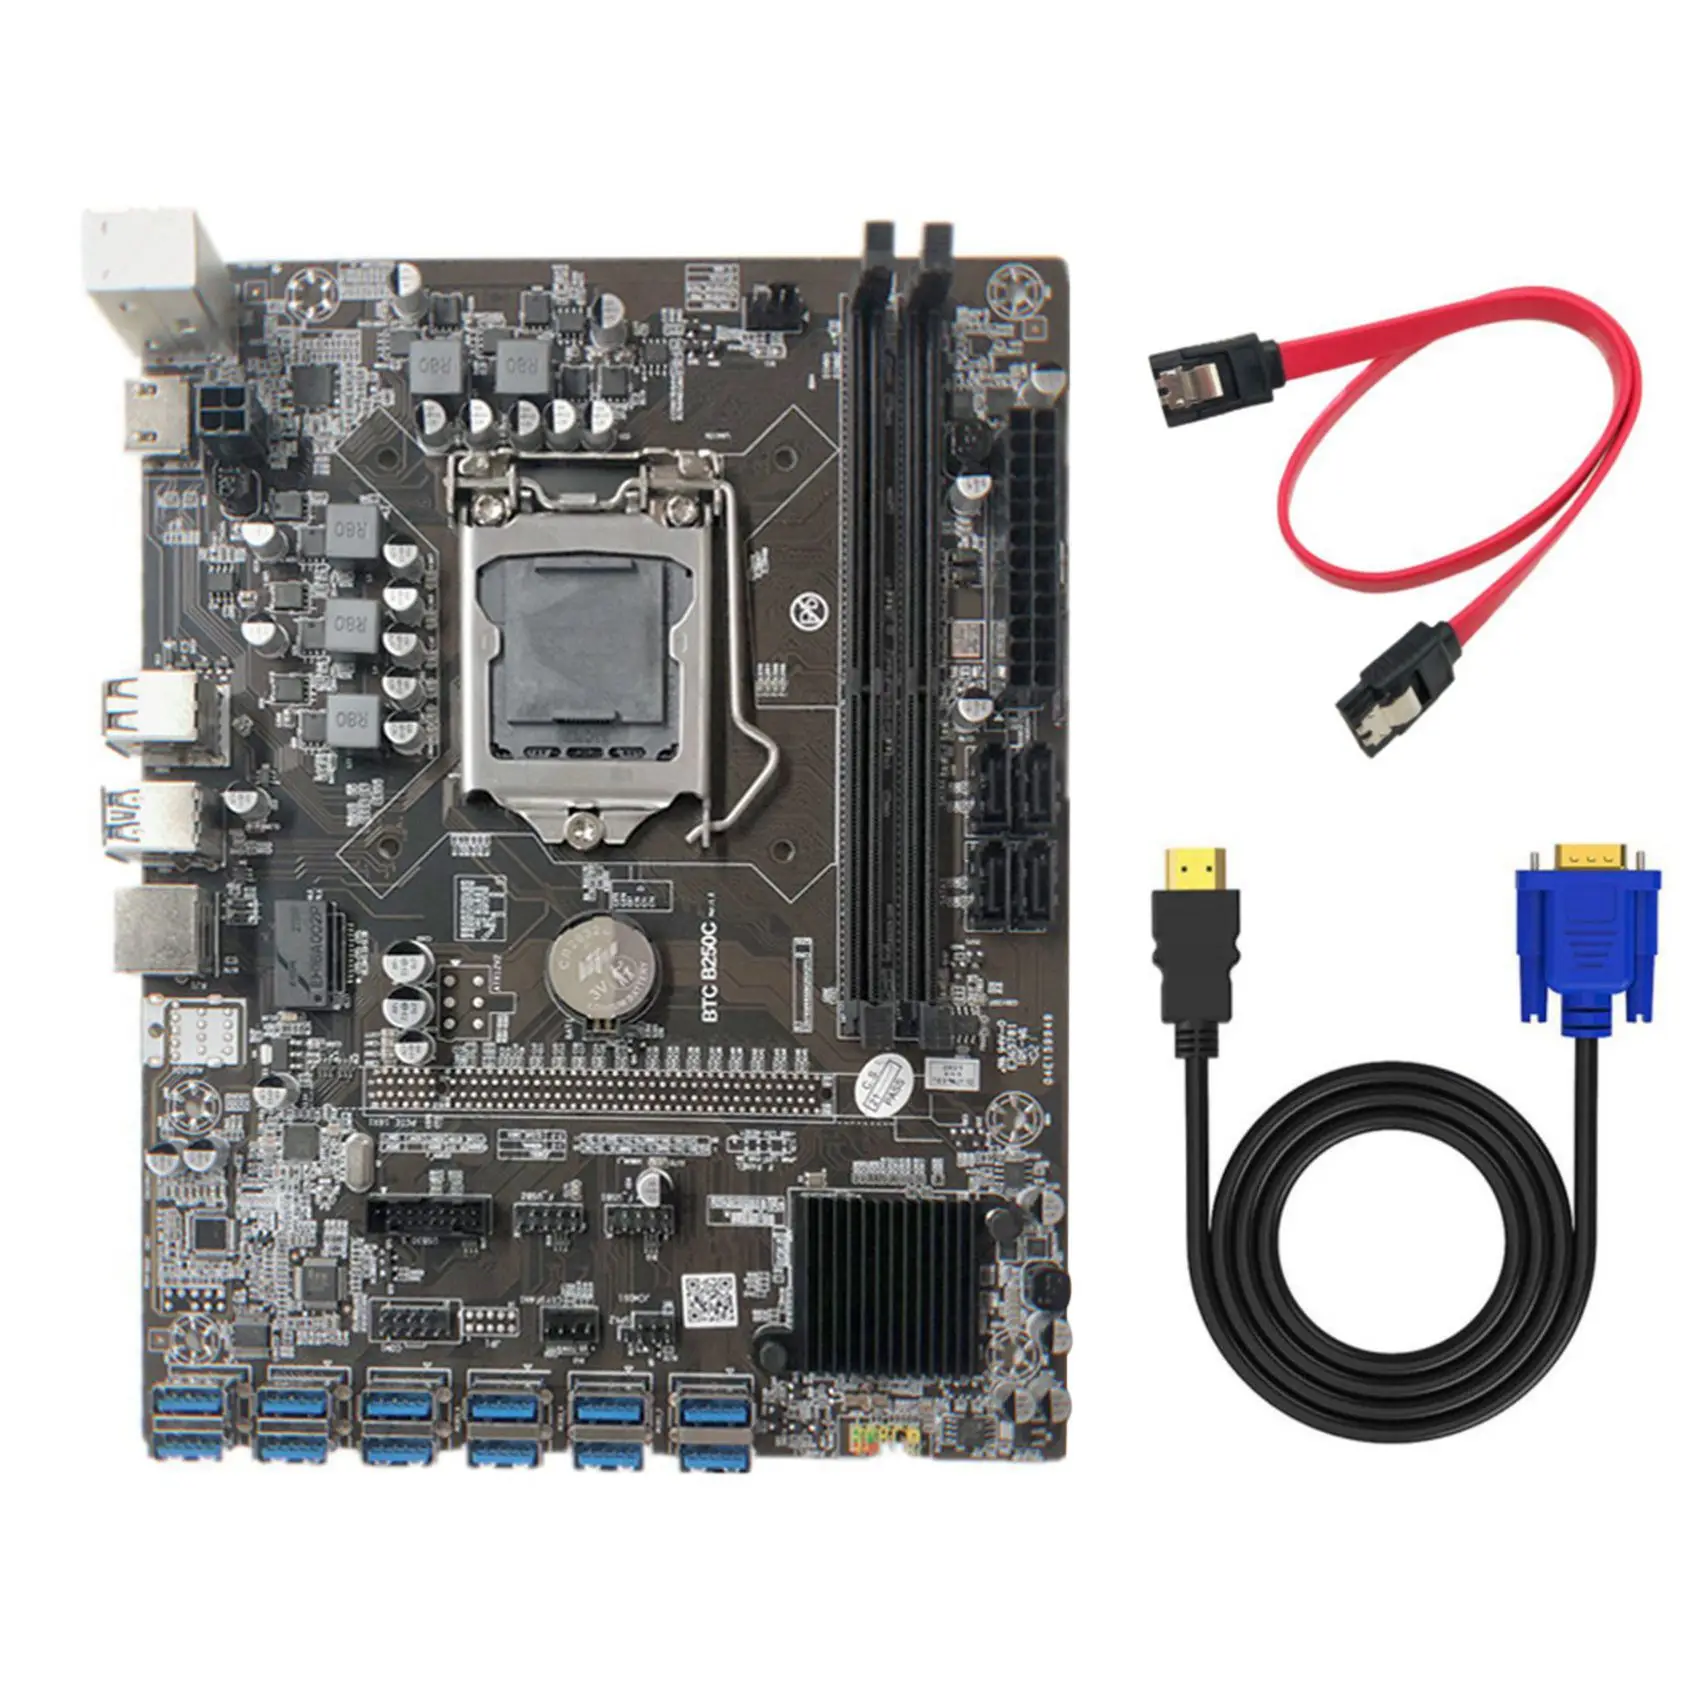 B250C Mining Motherboard with HD to VGA Cable+SATA Cable 12 PCIE to USB3.0 GPU Slot LGA1151 Support DDR4 RAM for BTC